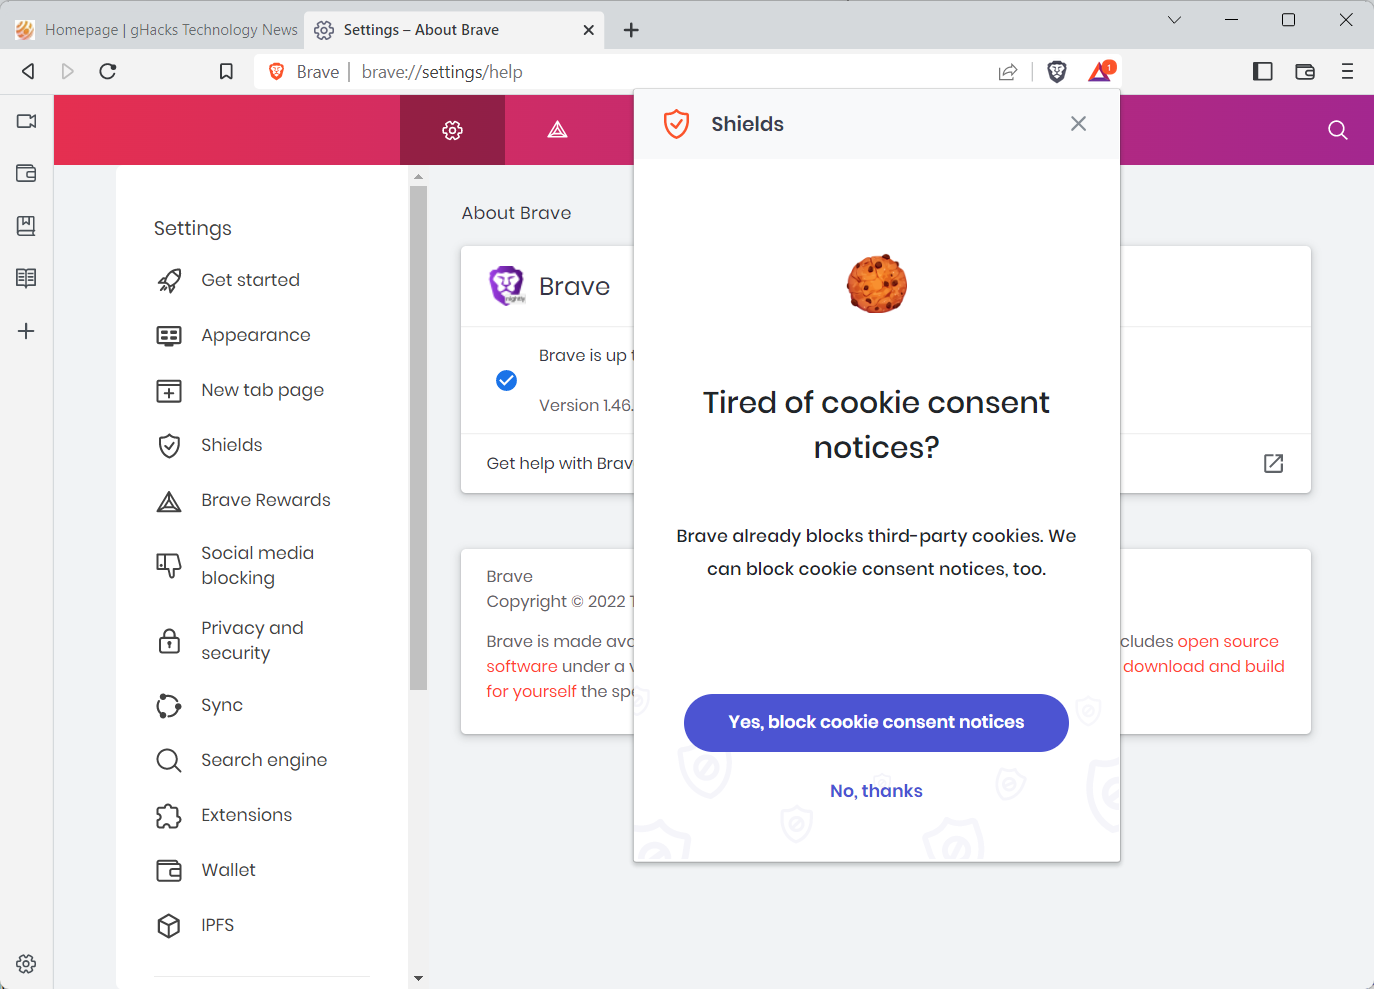 How to enable Brave's upcoming cookie consent blocking feature right now